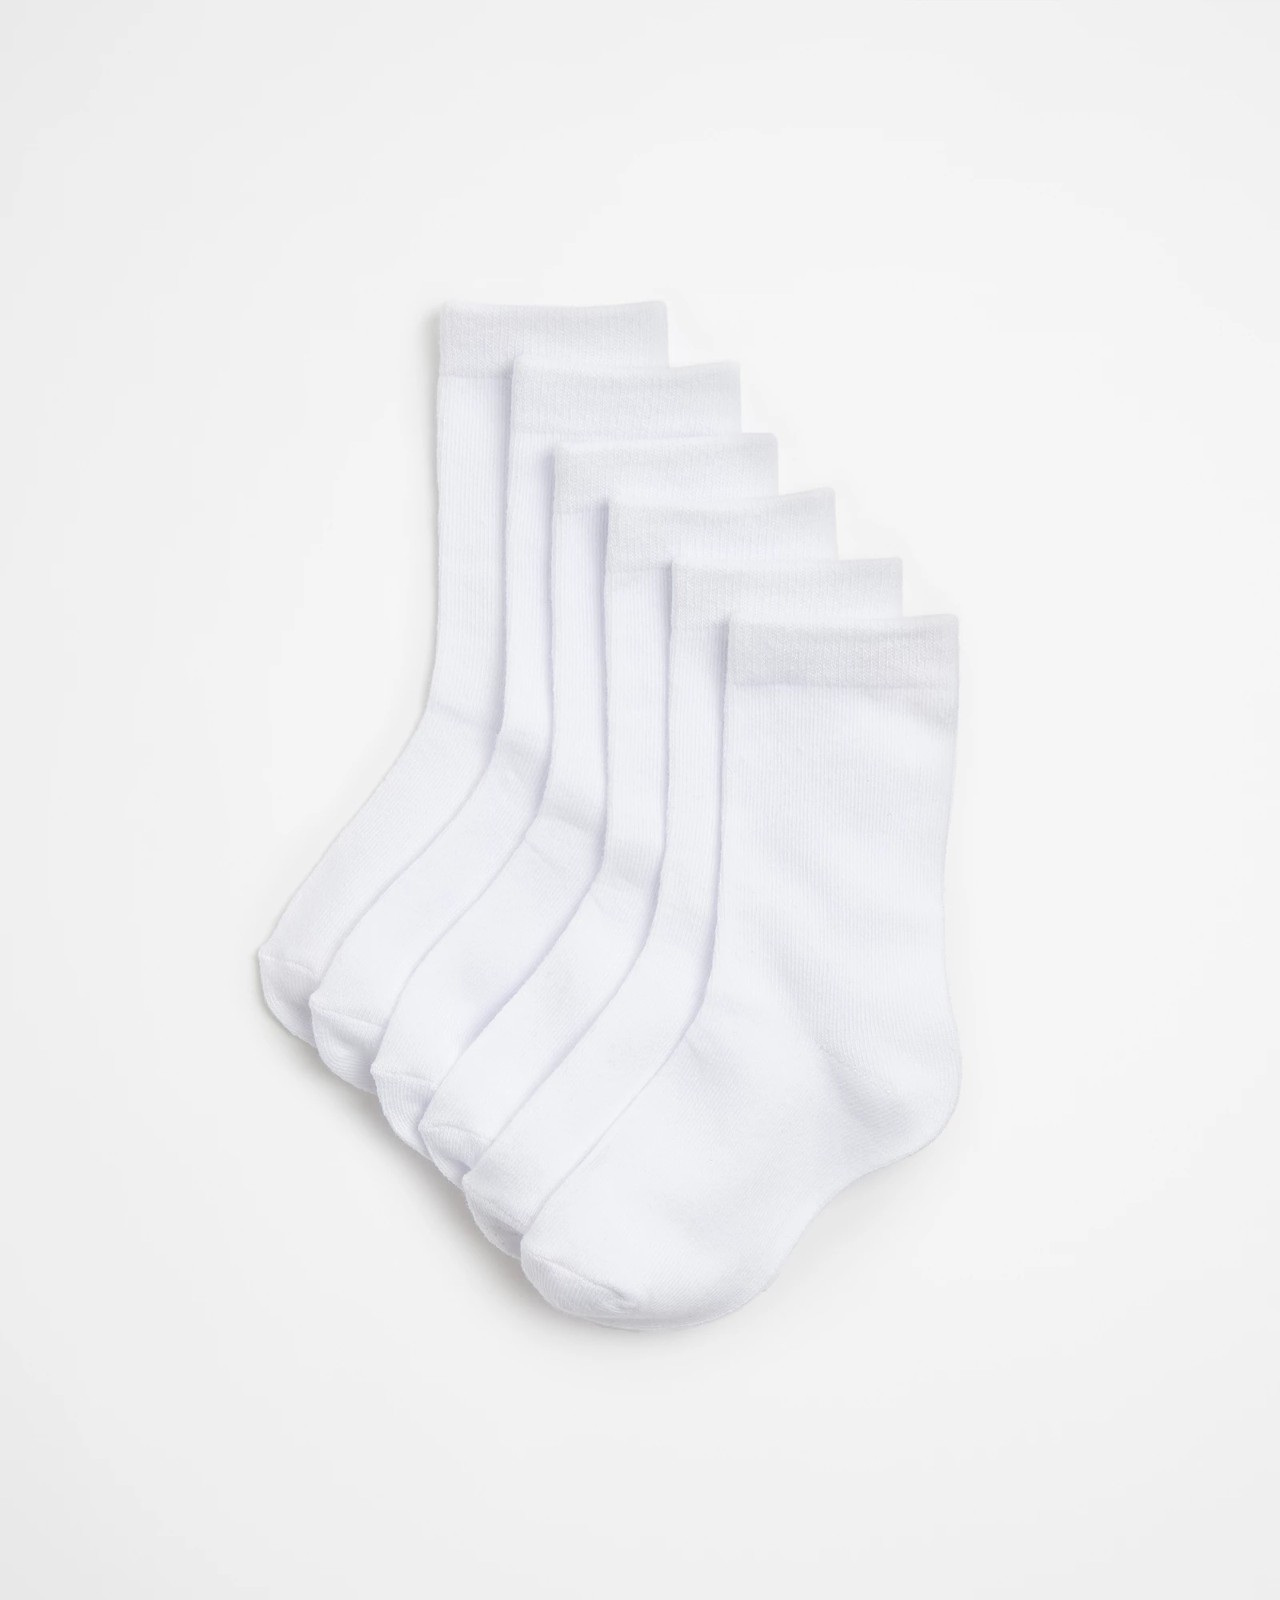 Solid Organic Cotton Toddler Crew Socks 6 Pack